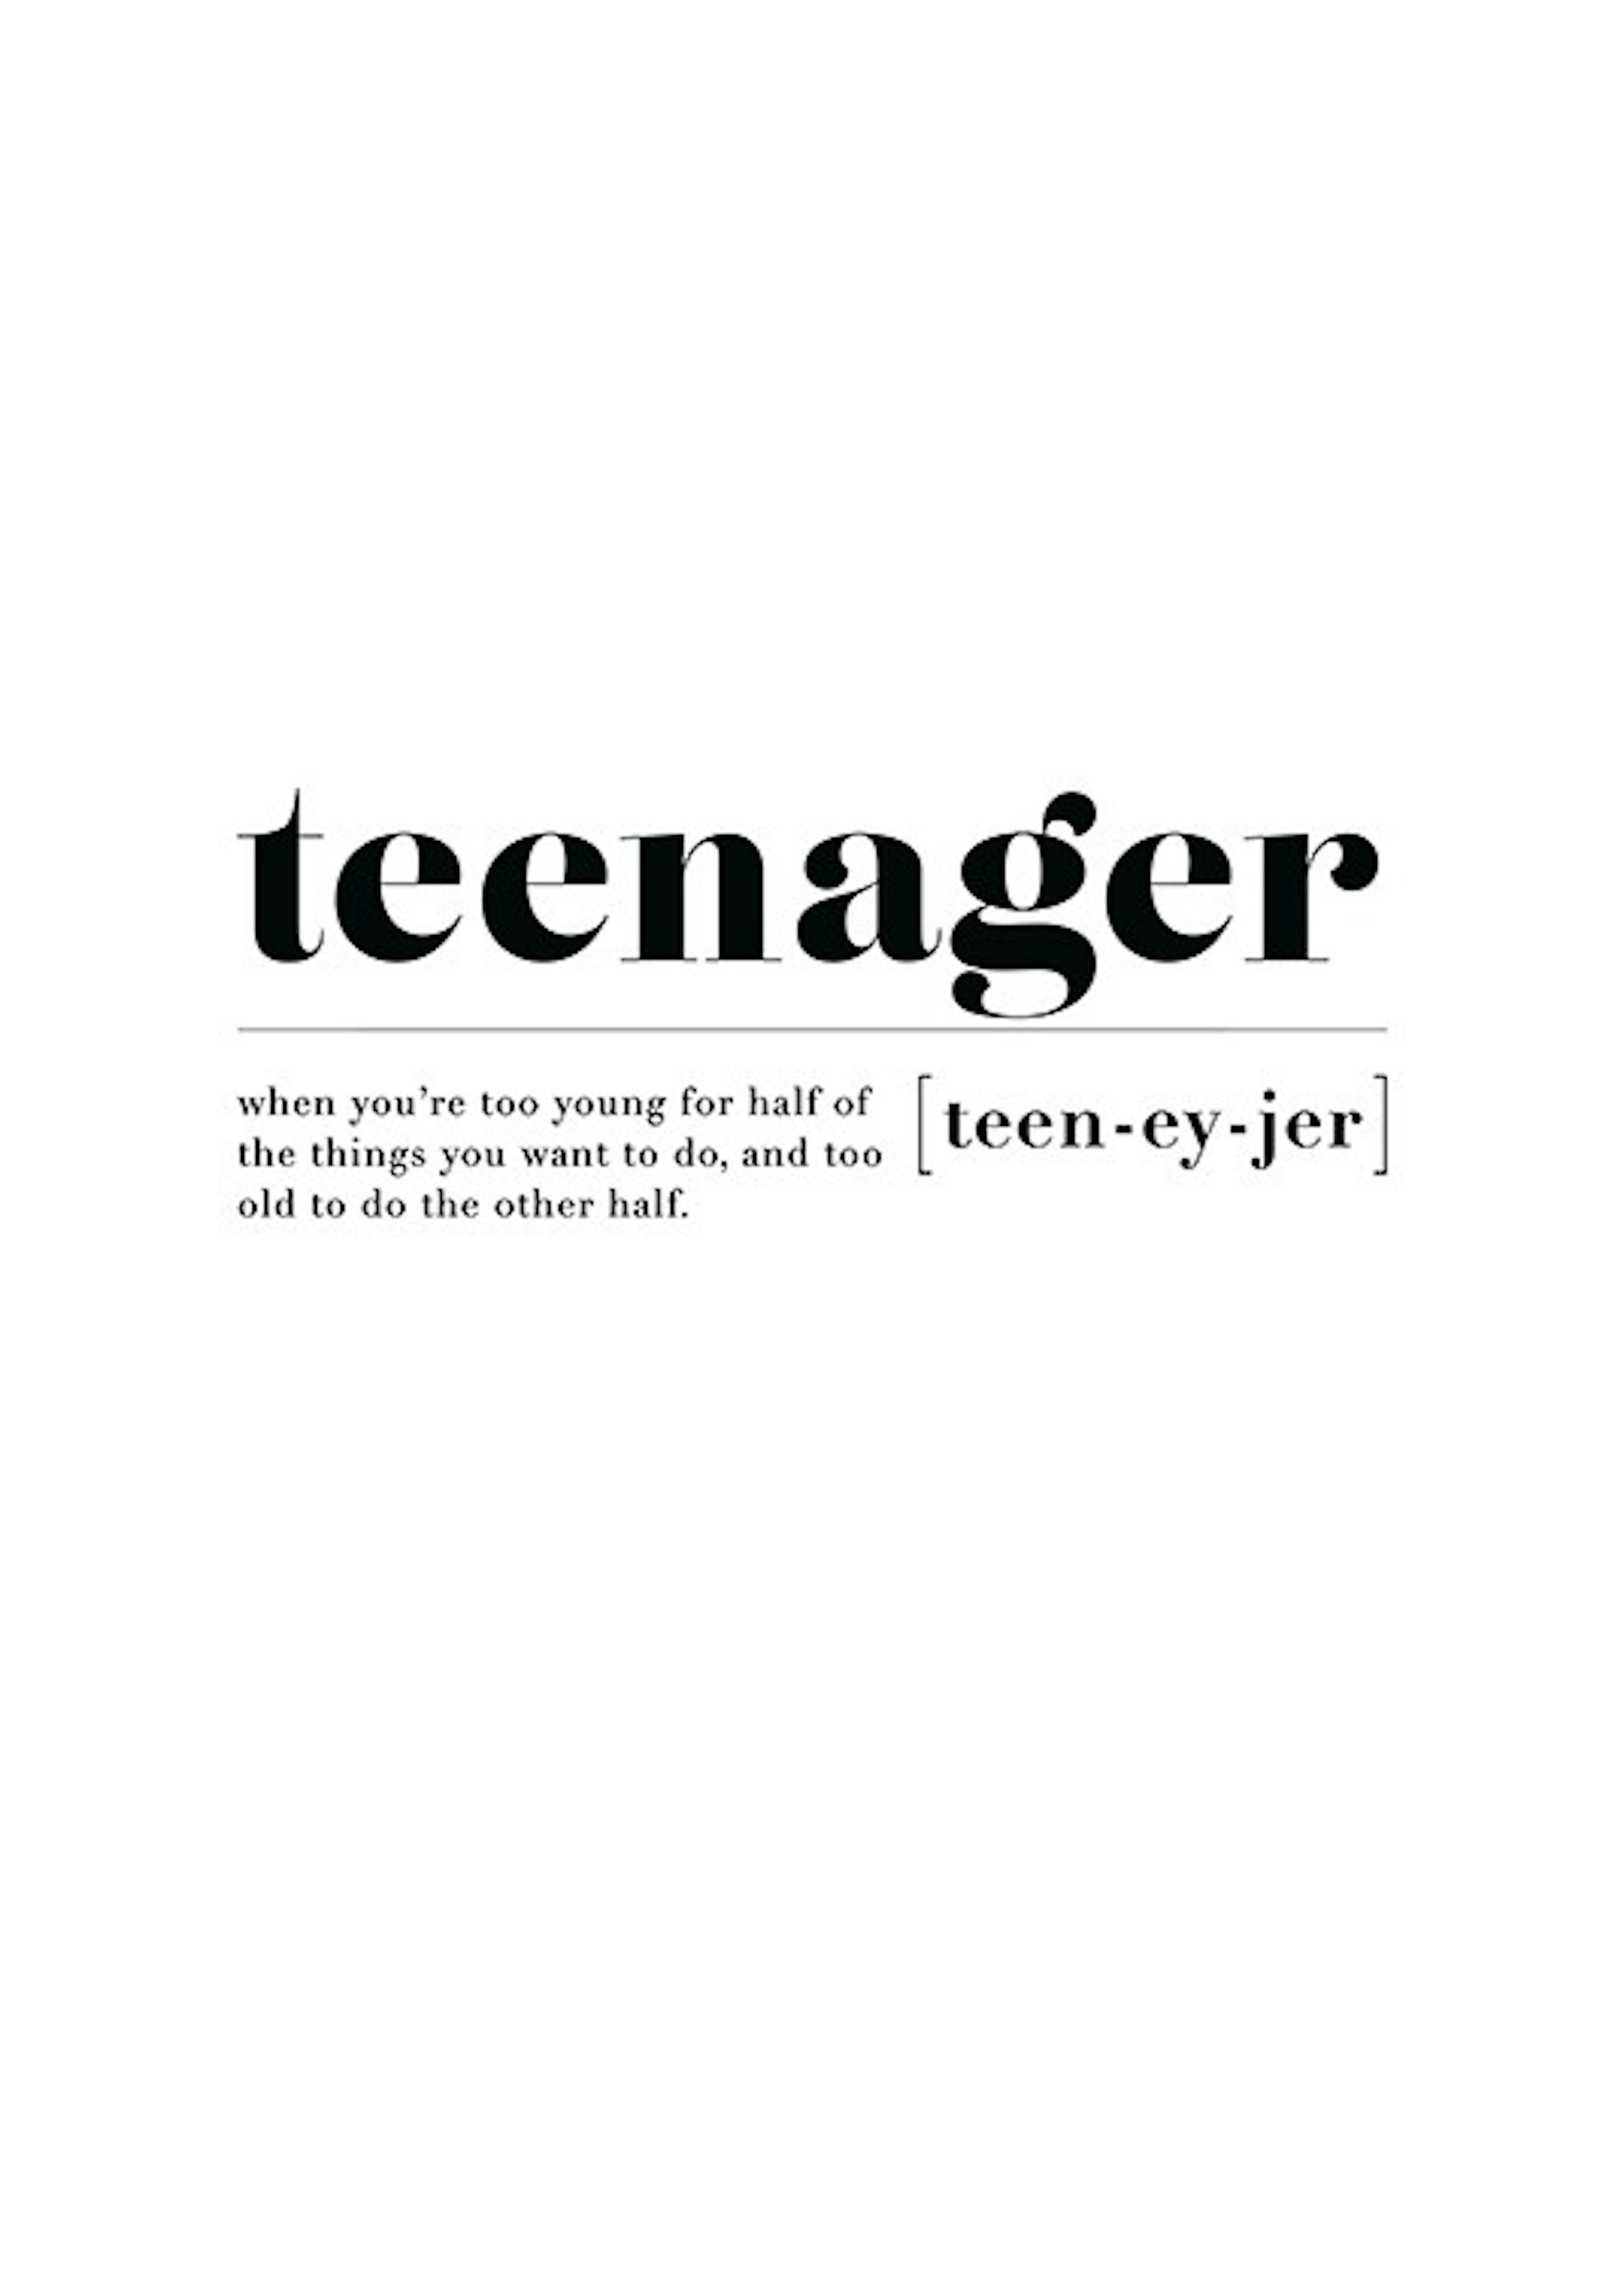 Teenager Poster 0